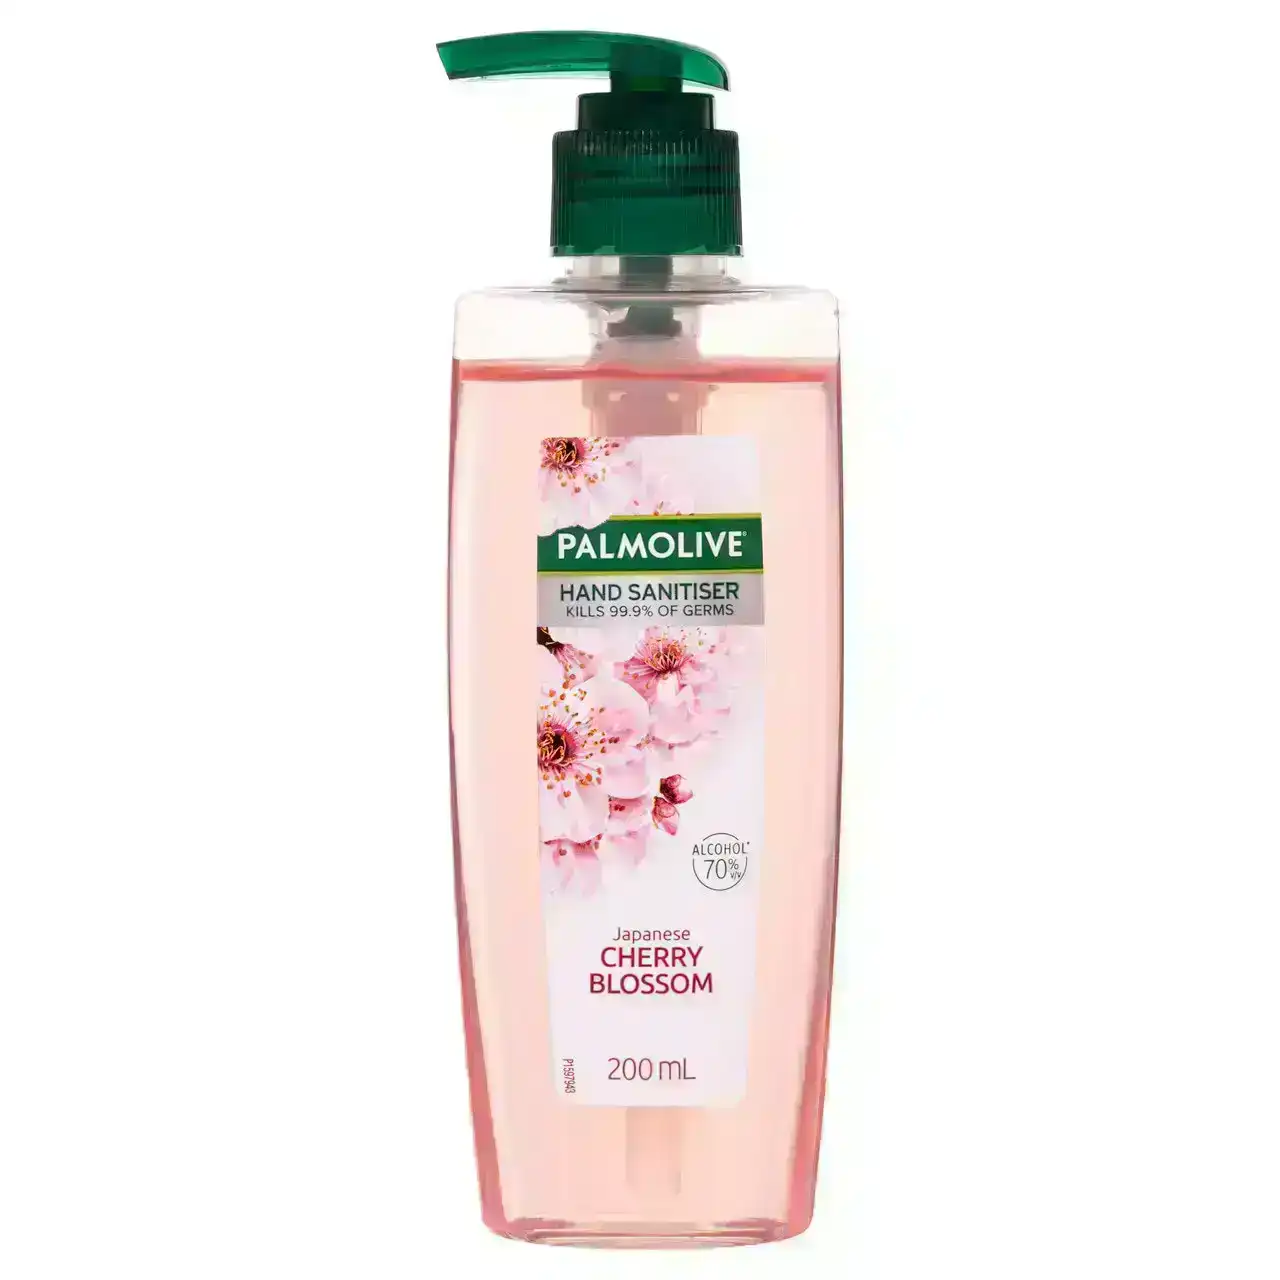 Palmolive Instant Antibacterial Hand Sanitiser Japanese Cherry Blossom Pump 200mL, Non-Sticky, Rinse Free, Kills Germs